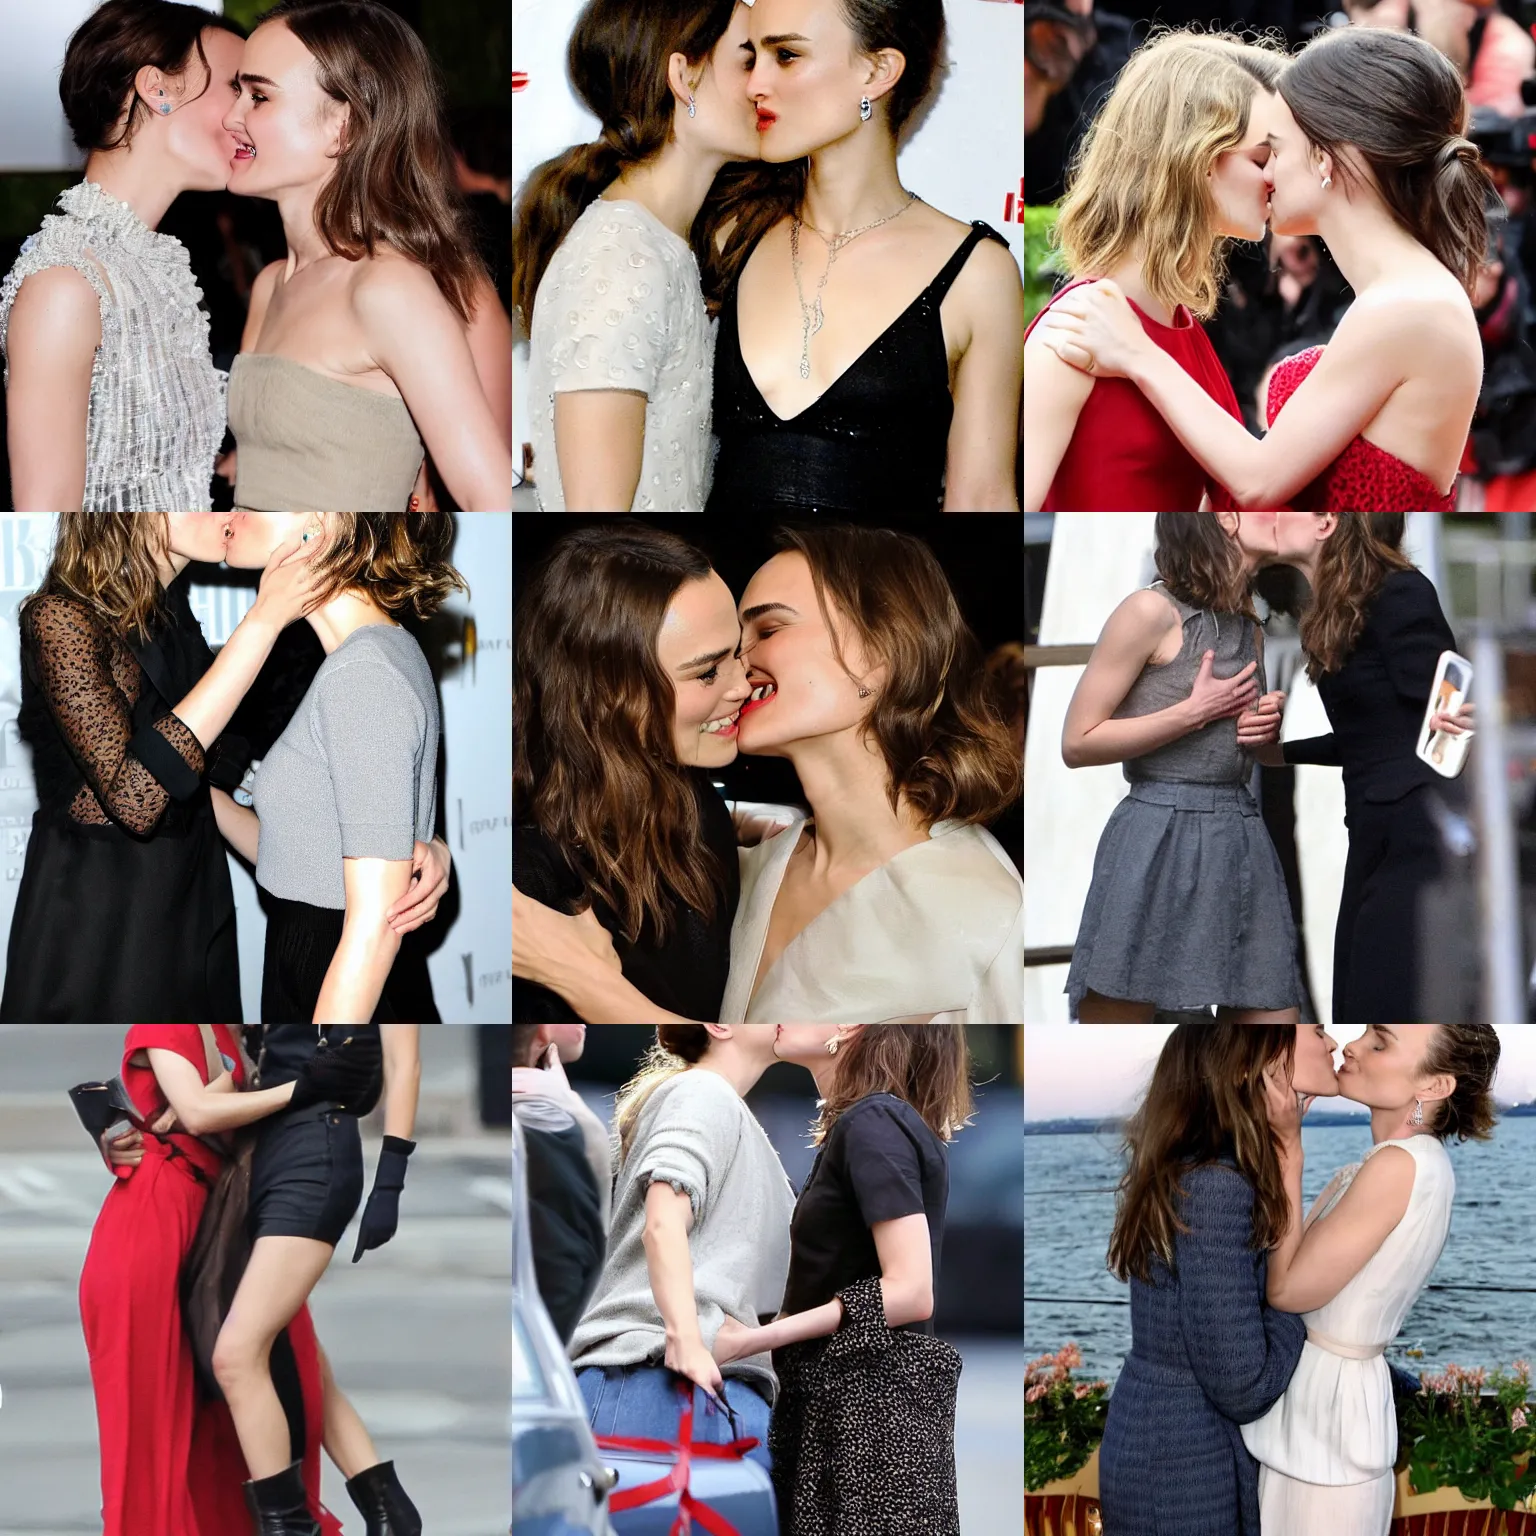 Prompt: keira knightley making out with natalie portman, candid photo, professional paparazzi photo, romantic kiss, two women